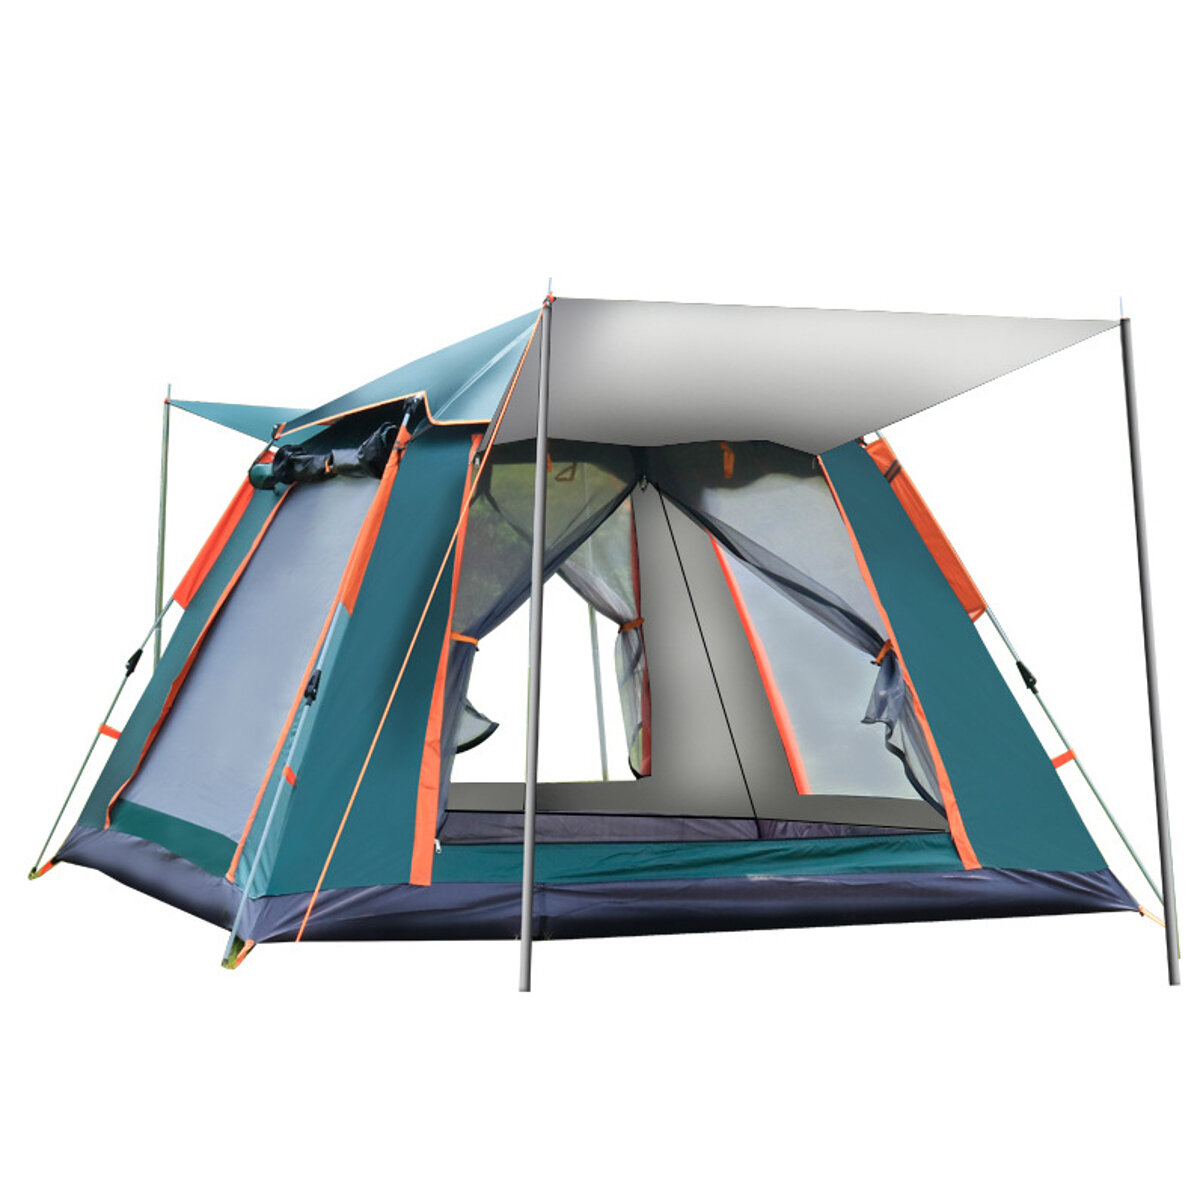 Image of IPRee® 6-7 People Fully Automatic Tent Silver Glue Outdoor Camping Family Picnic Travel Tent